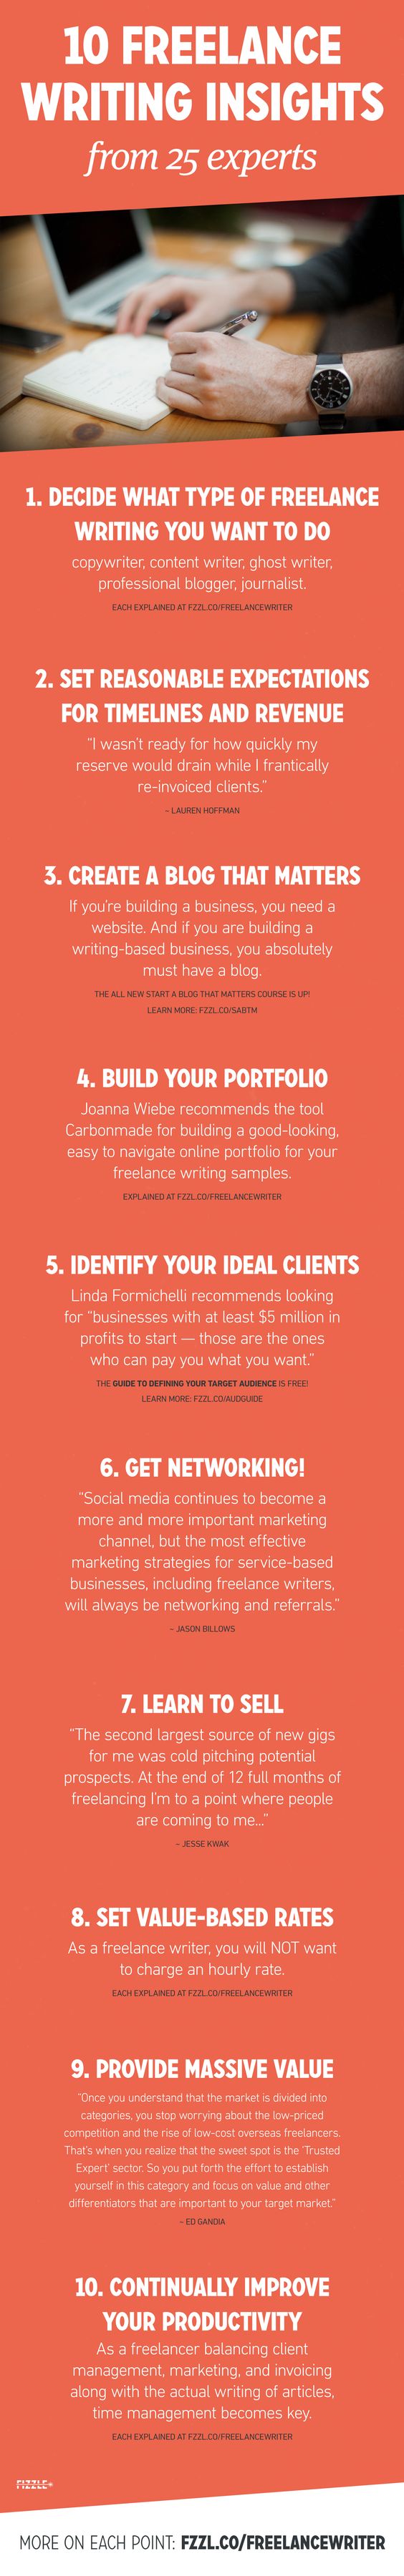 How to Become a Freelance Writer: 10 Tips